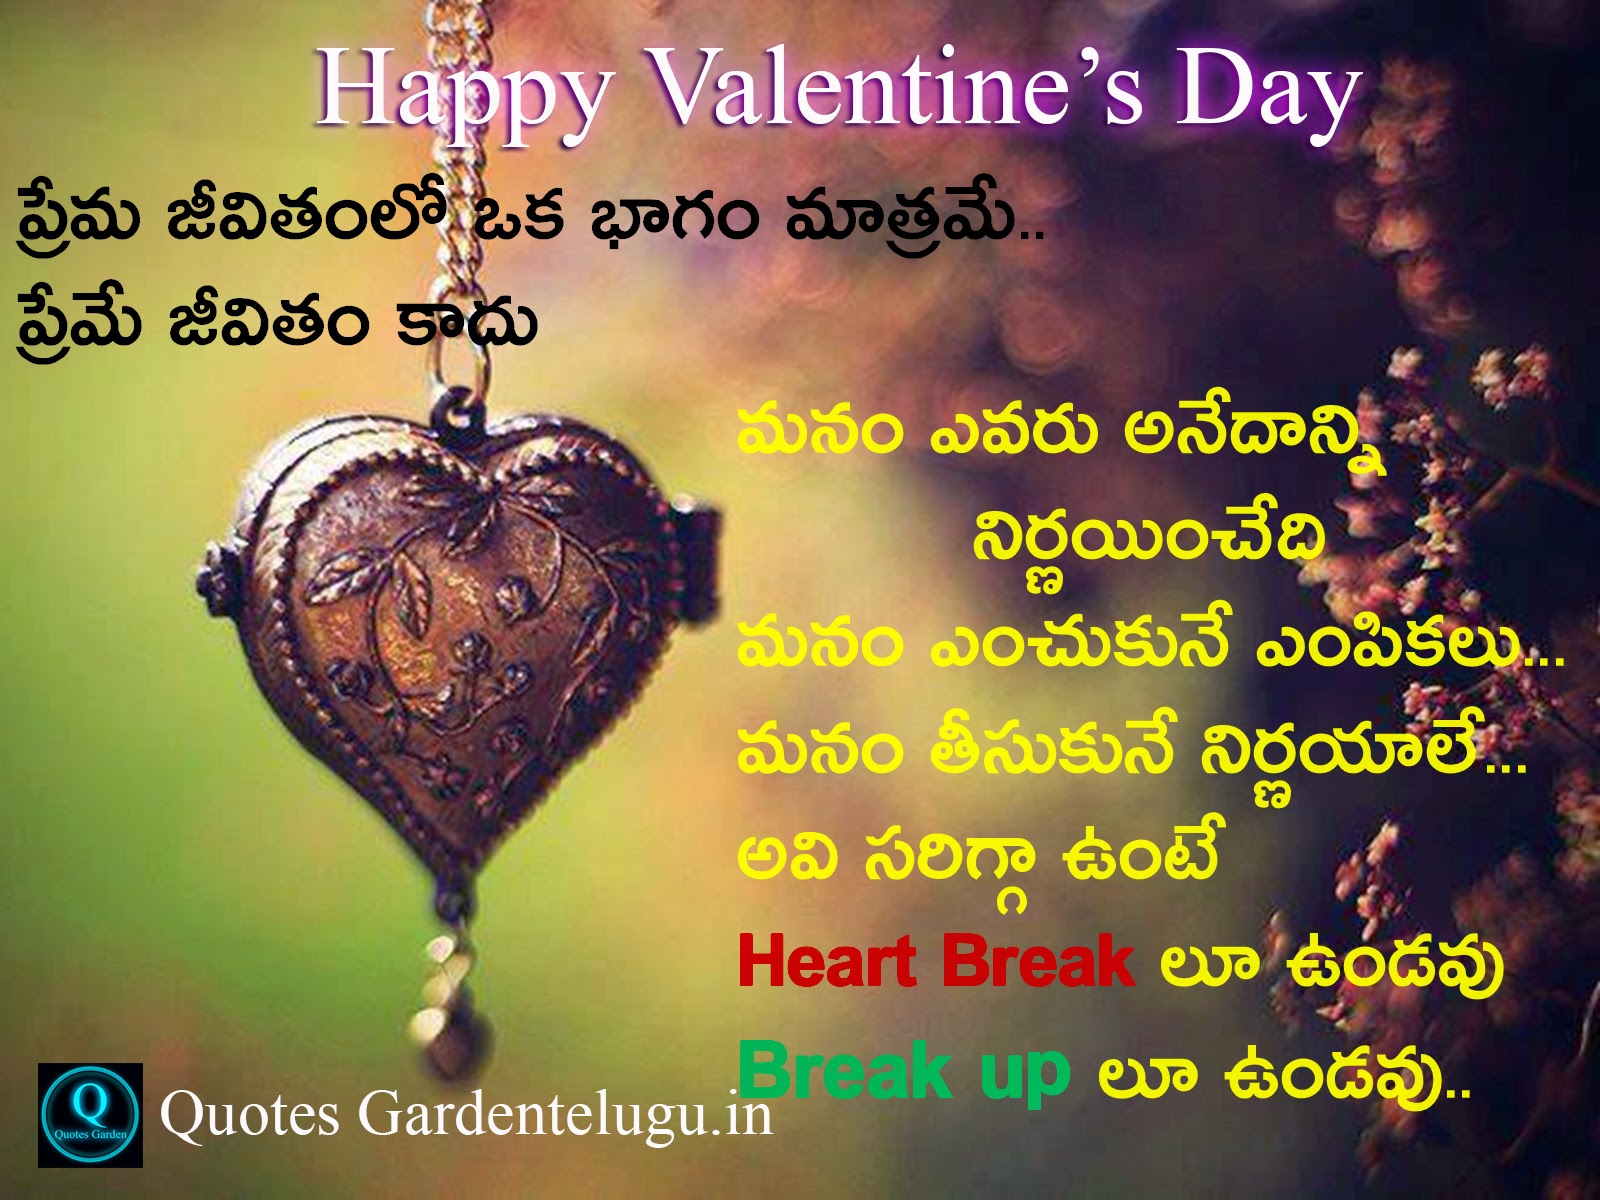 Valentine's Day Special Love Quotes Images photoes Greetings Wishes HD Wallpapers